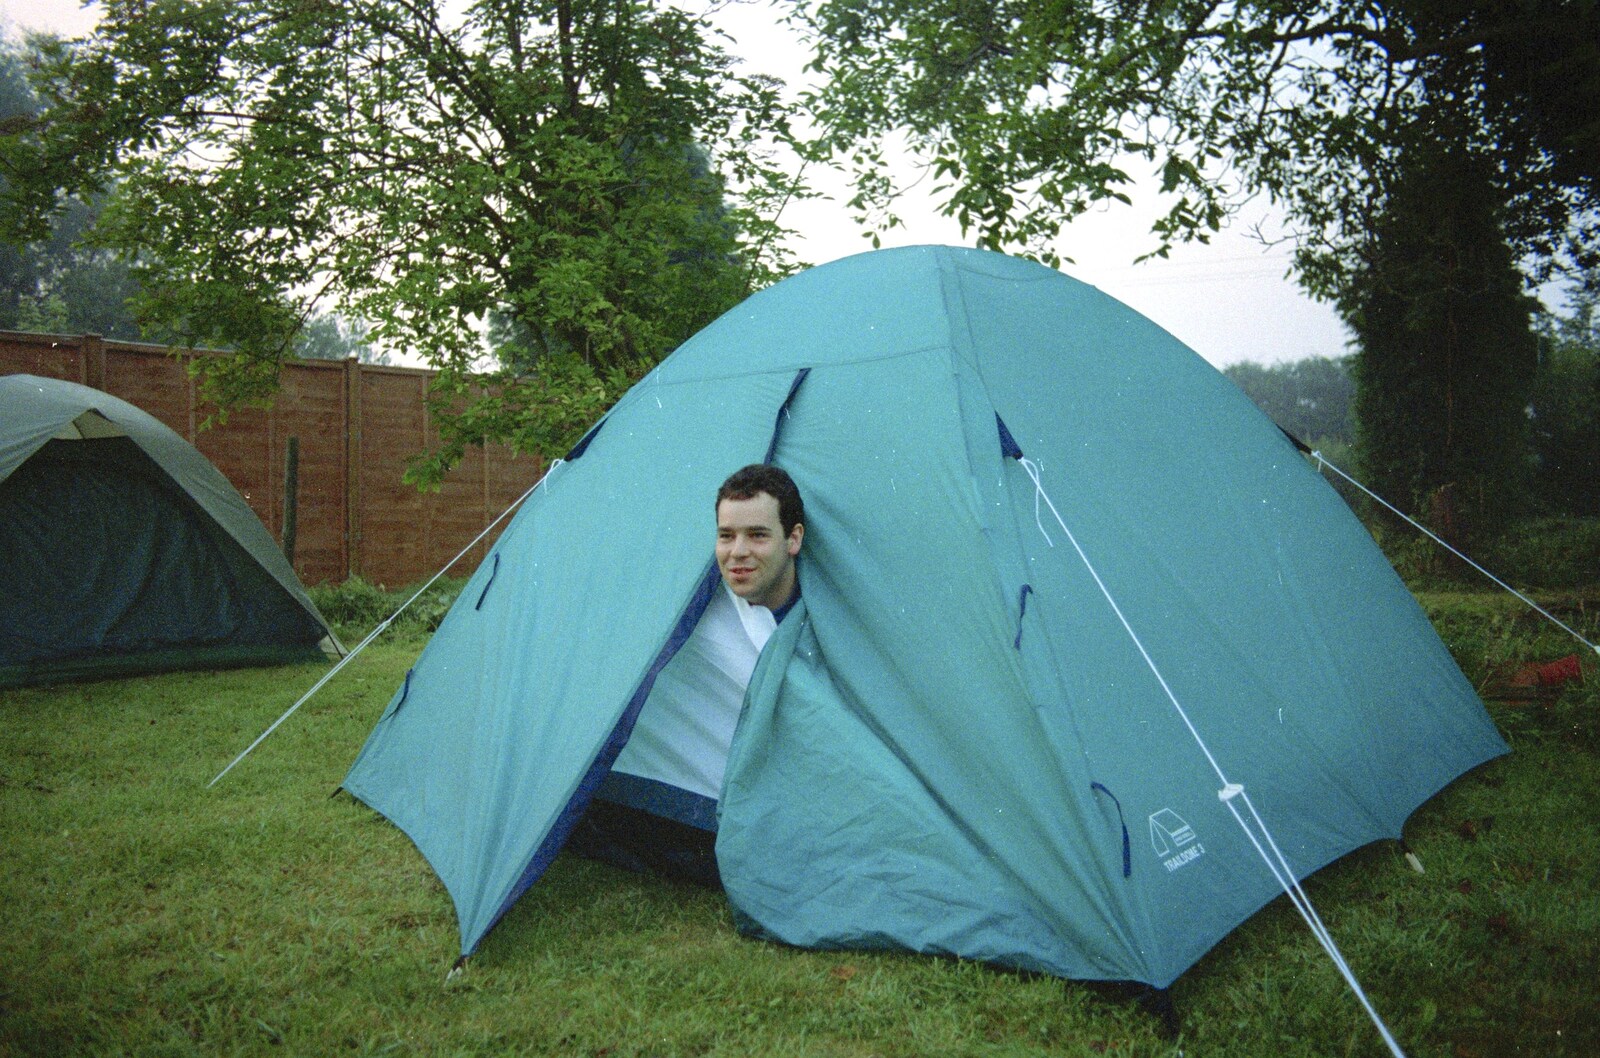 Russell tests his tent out from Bromestock 1 and a Mortlock Barbeque, Brome and Thrandeston, Suffolk - 24th June 1997